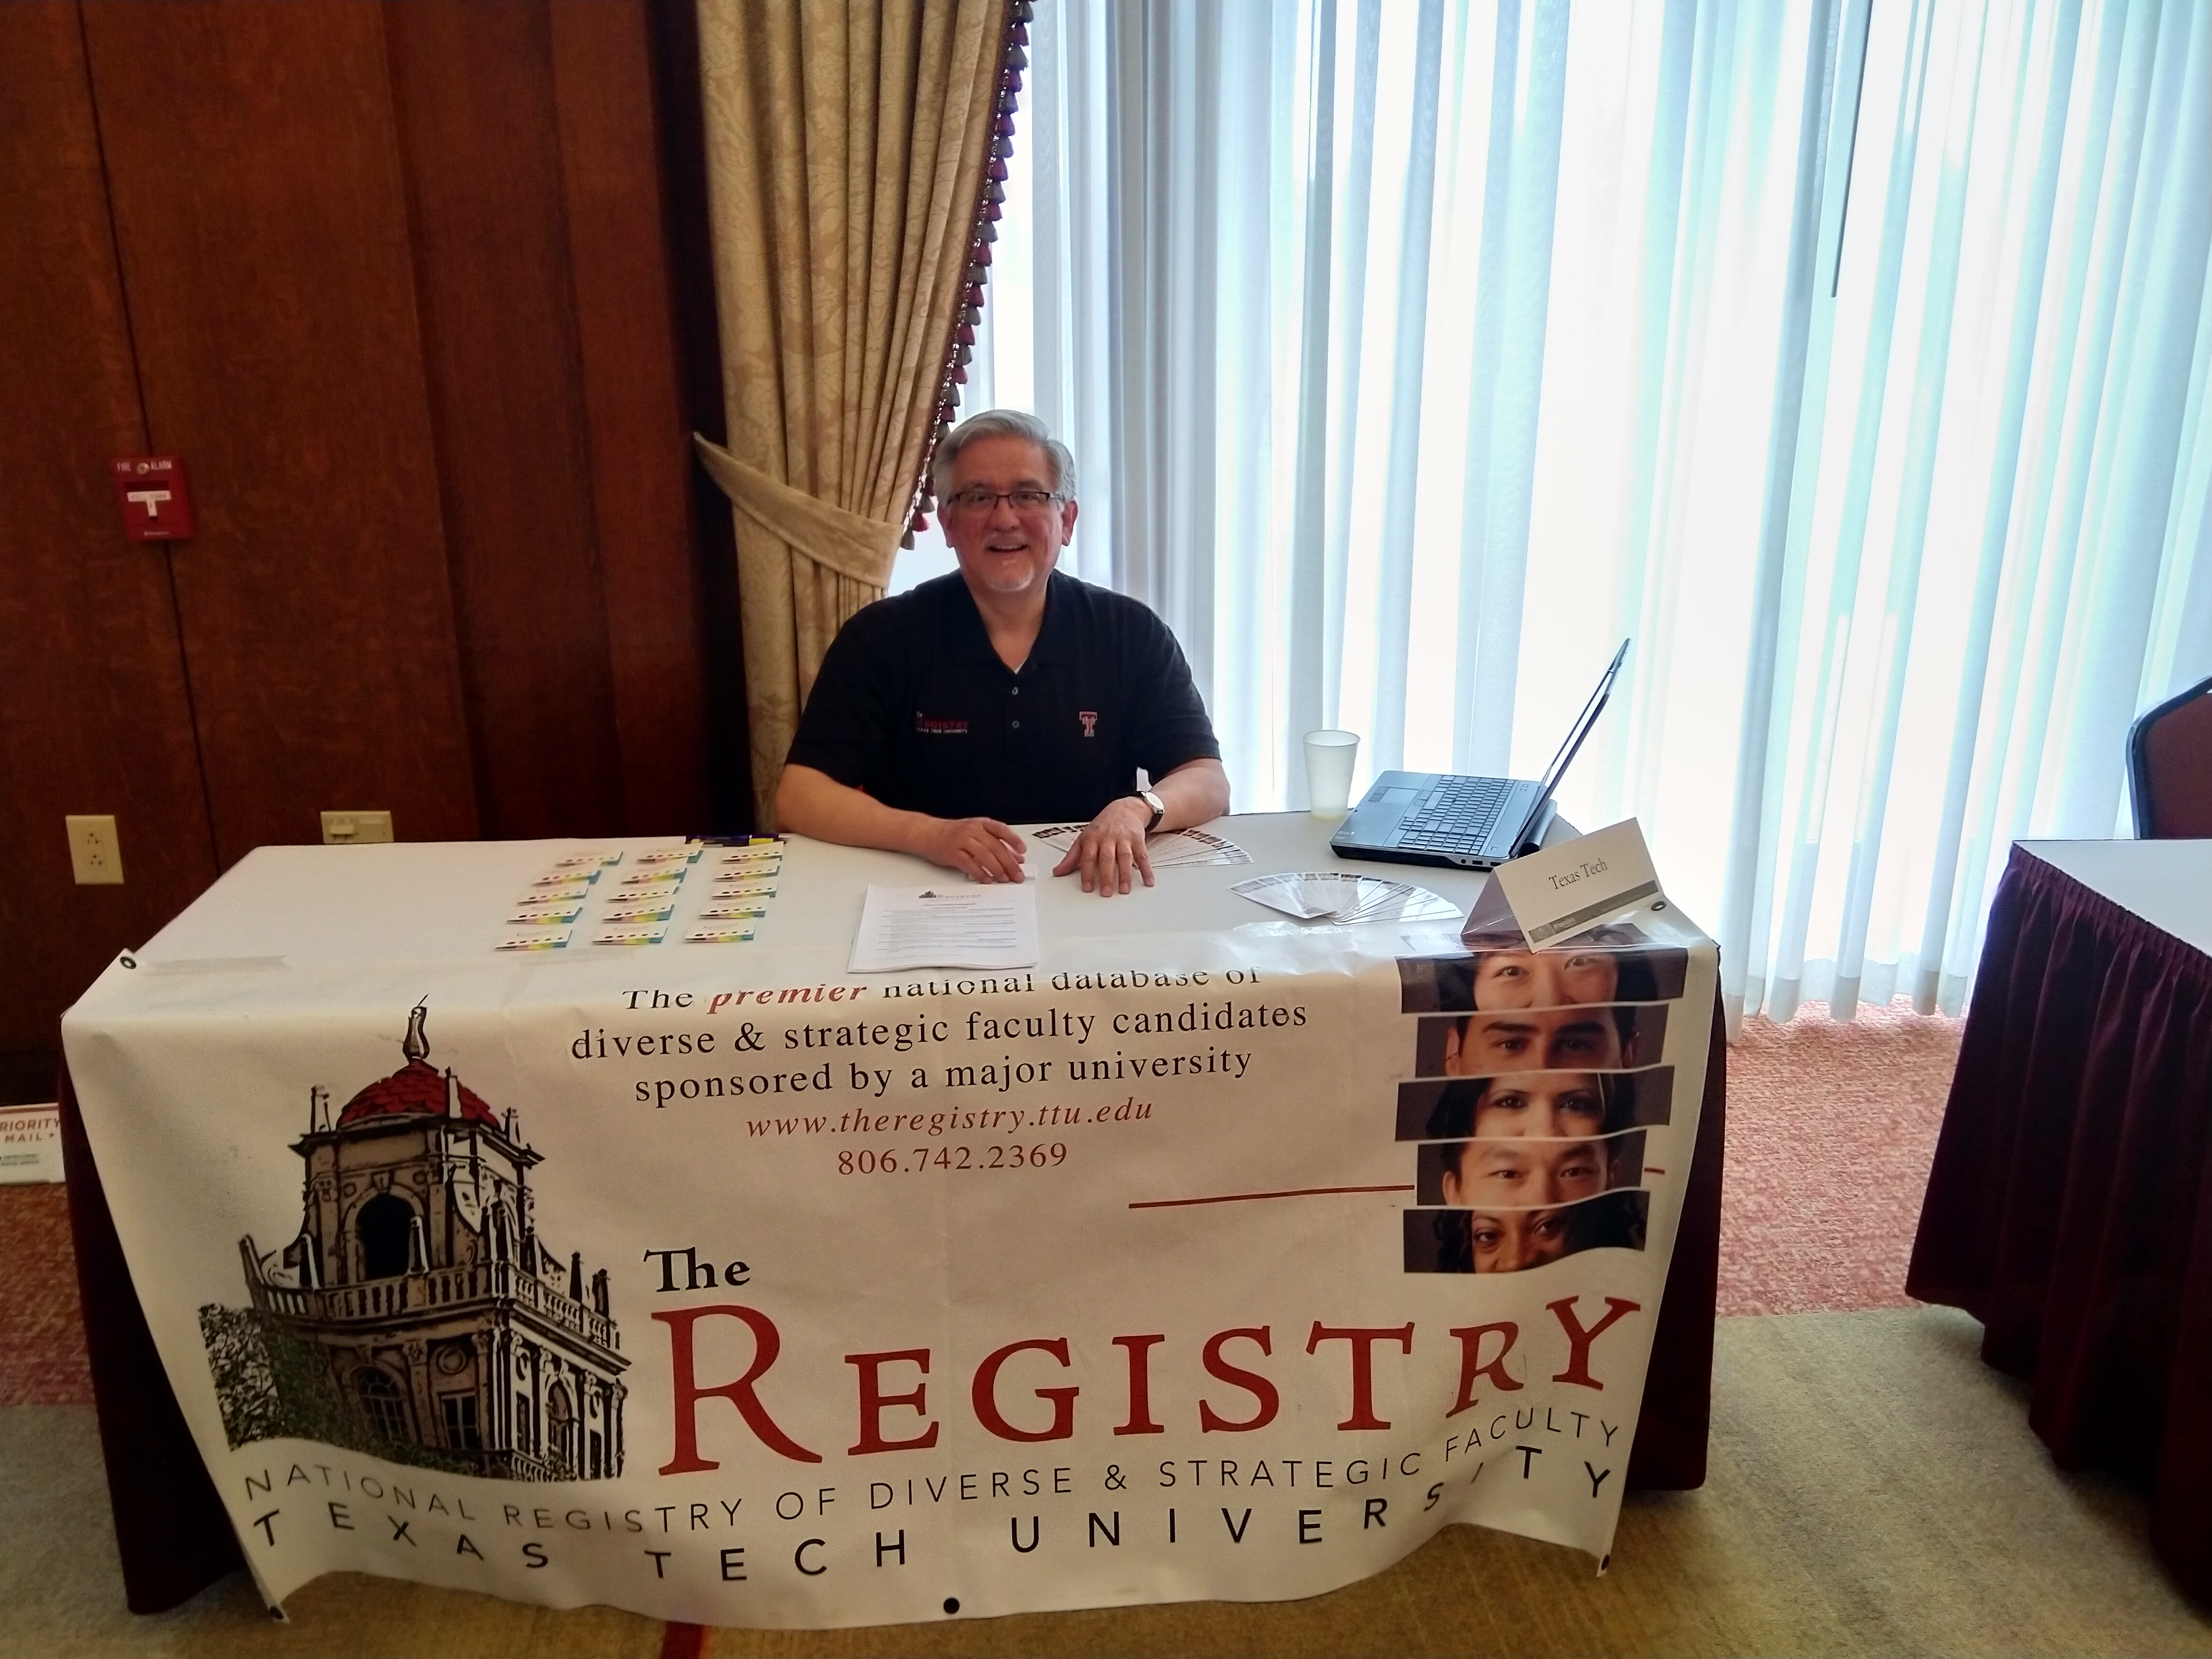 The REGISTRY at the 2019 Faculty Women of Color in the Academy
National Conference.